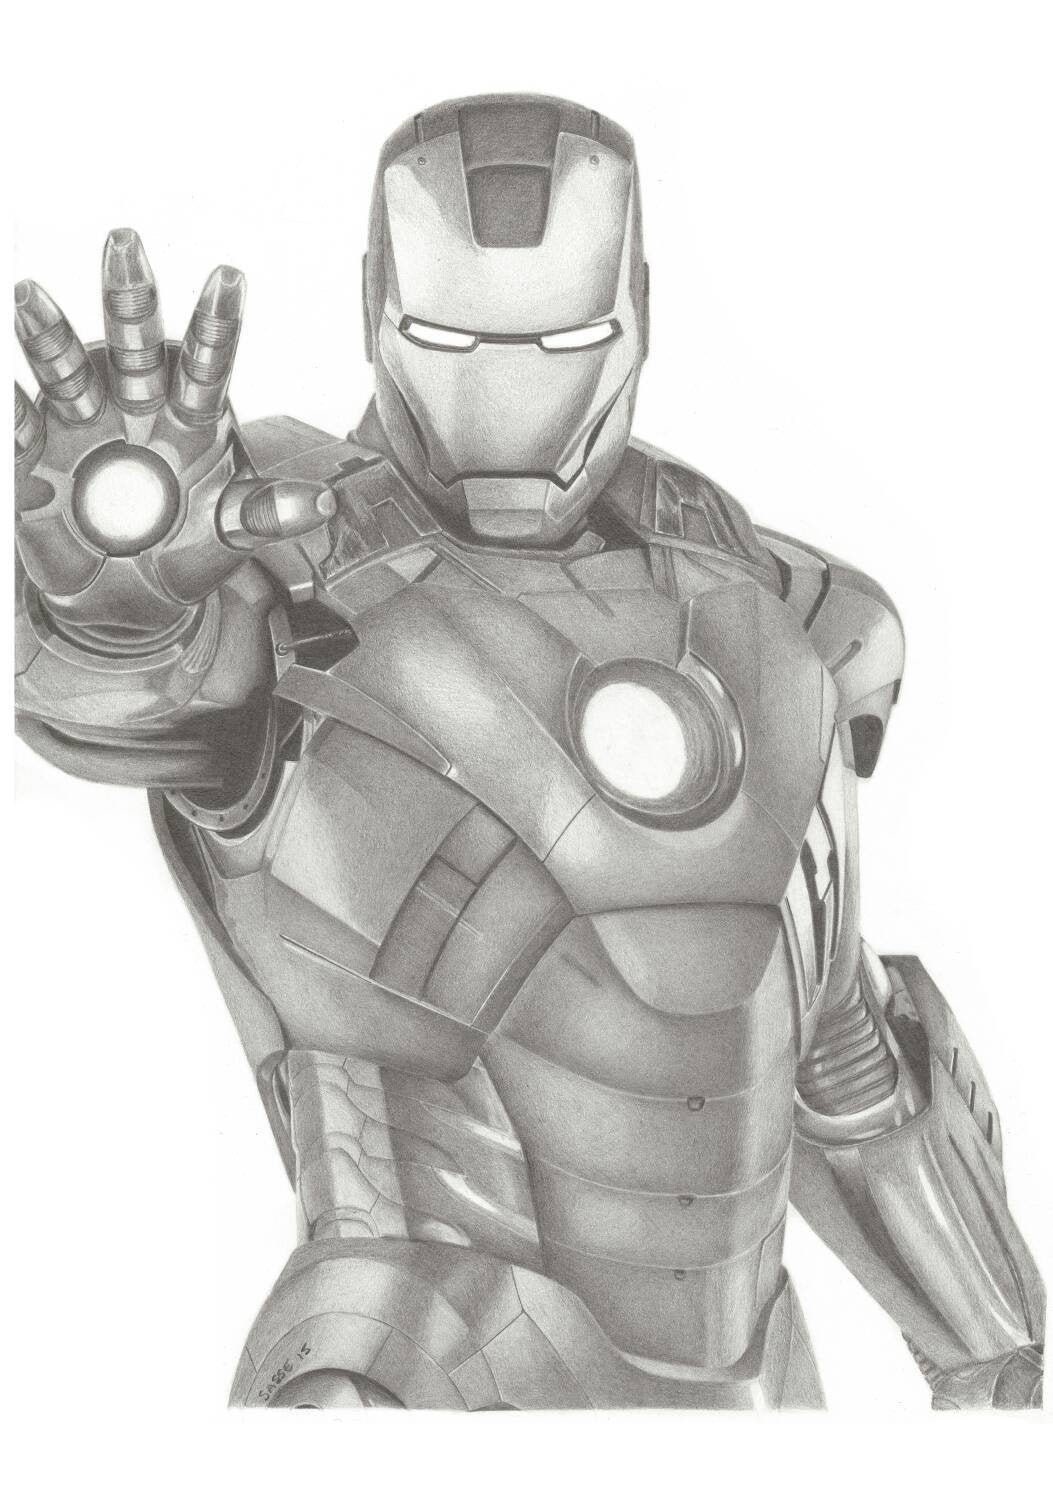 Ironman Marvel A3 Print off Original Pencil Drawing Limited 25 | Etsy